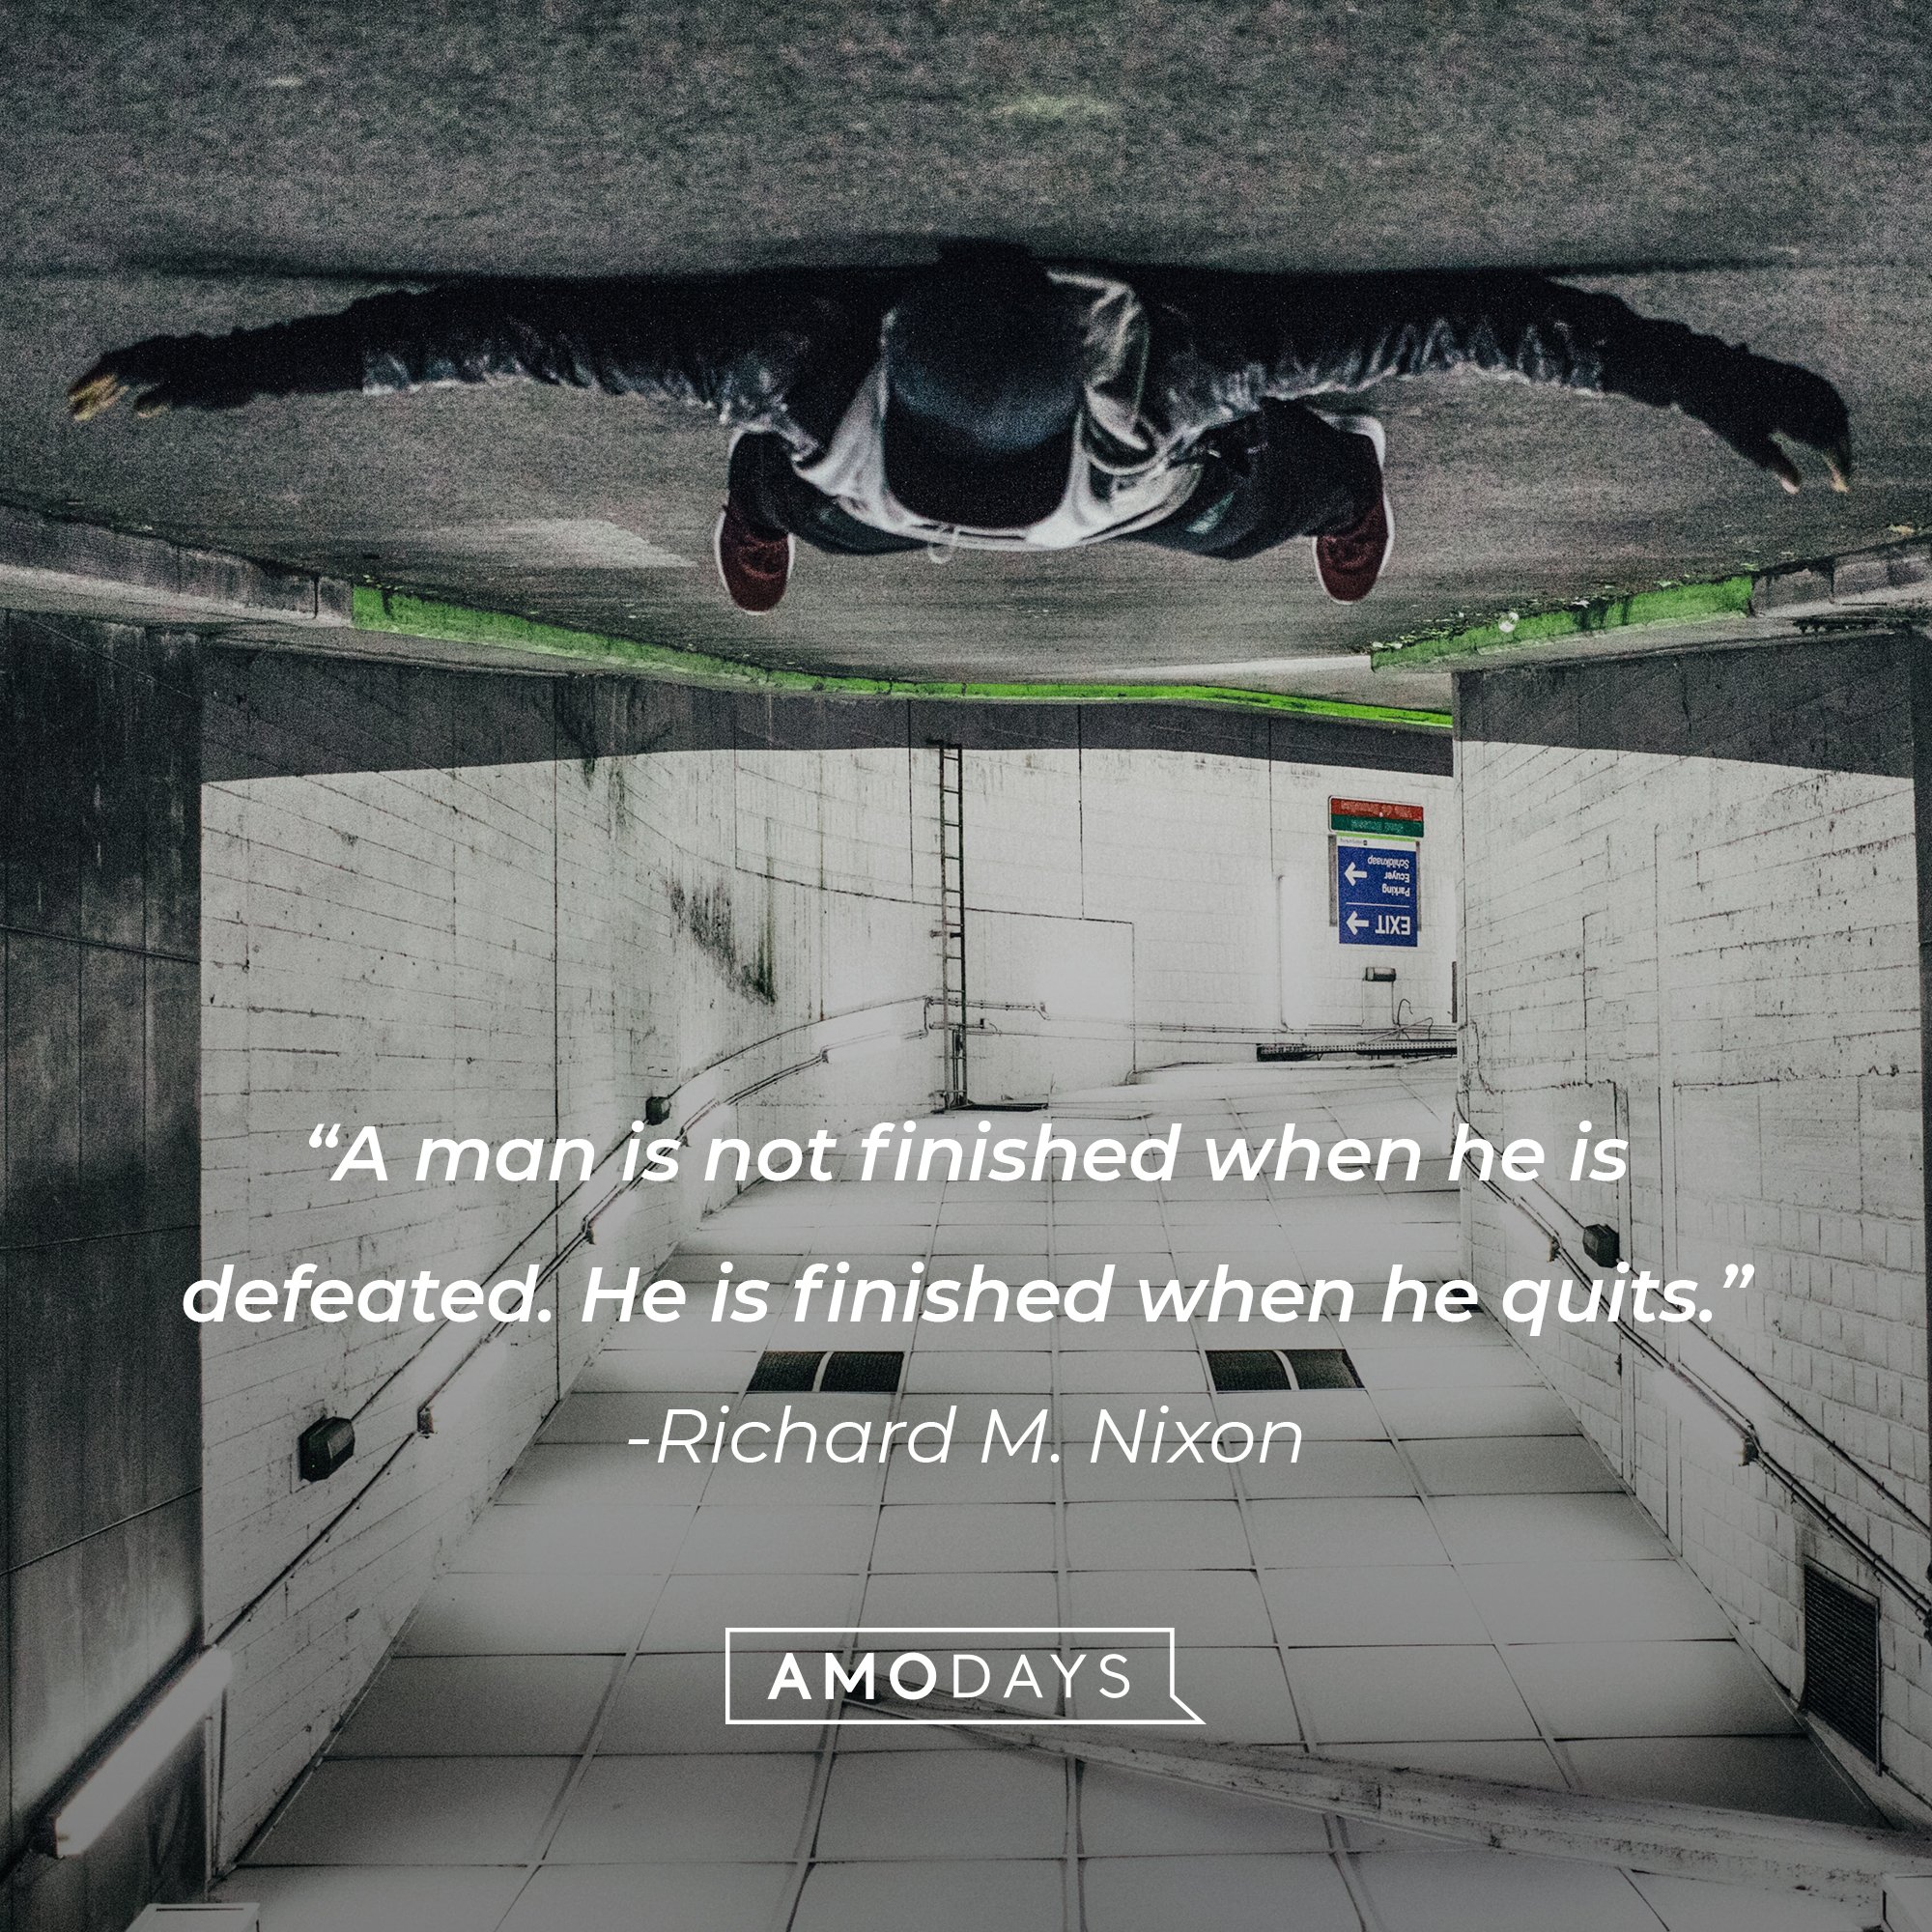 Richard M. Nixon's quote: "A man is not finished when he is defeated. He is finished when he quits." | Image: AmoDays